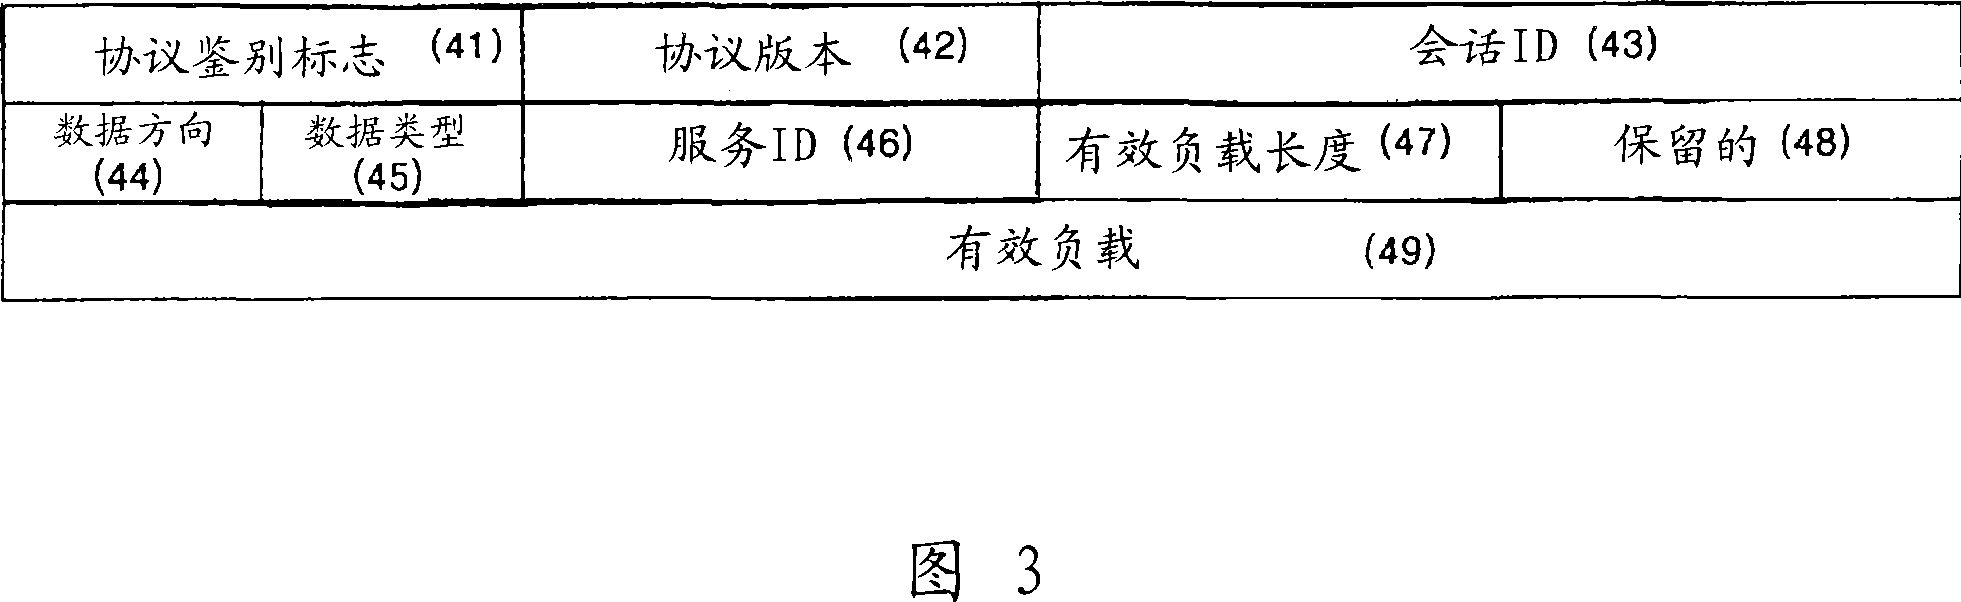 A terminal data format and a communication control system and method using the terminal data format